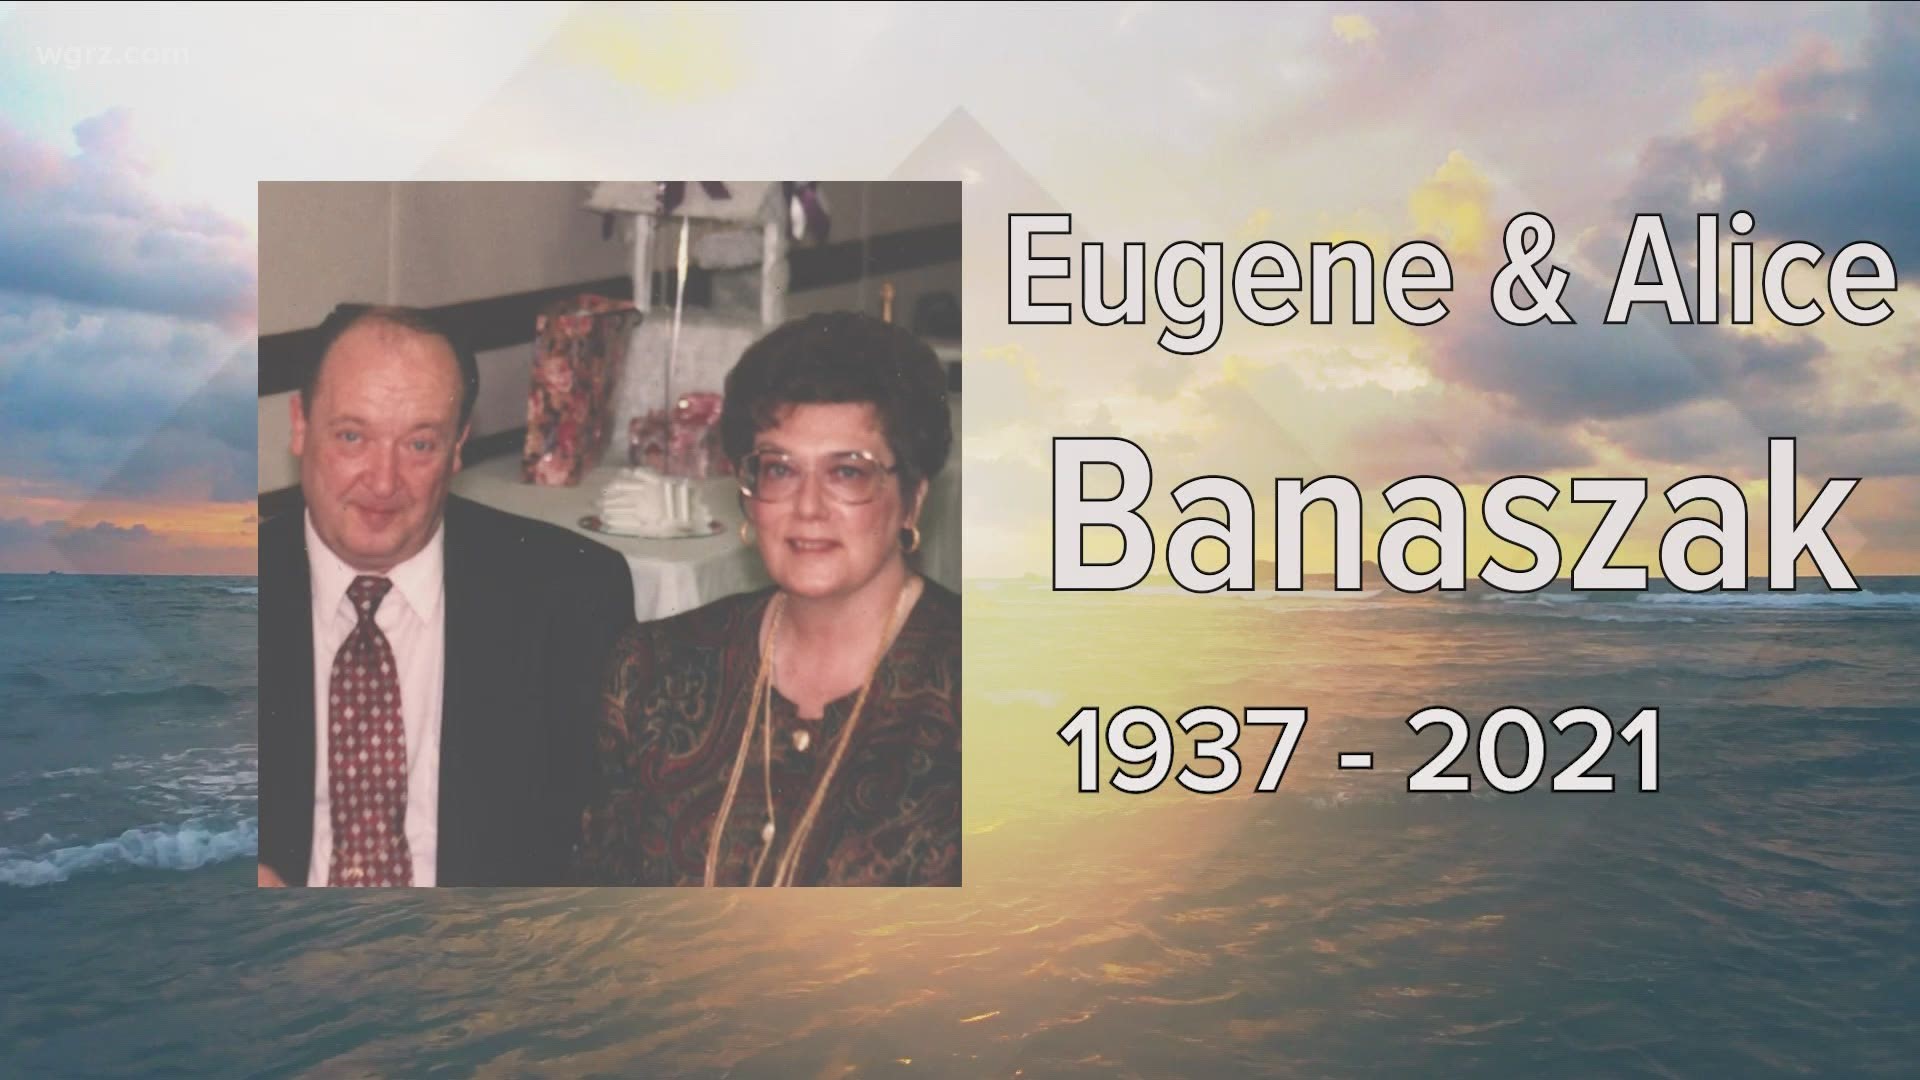 After a childhood, an adolescence and adulthood together, Eugene and Alice Banaszak passed within a few days of each other at the beginning of March.